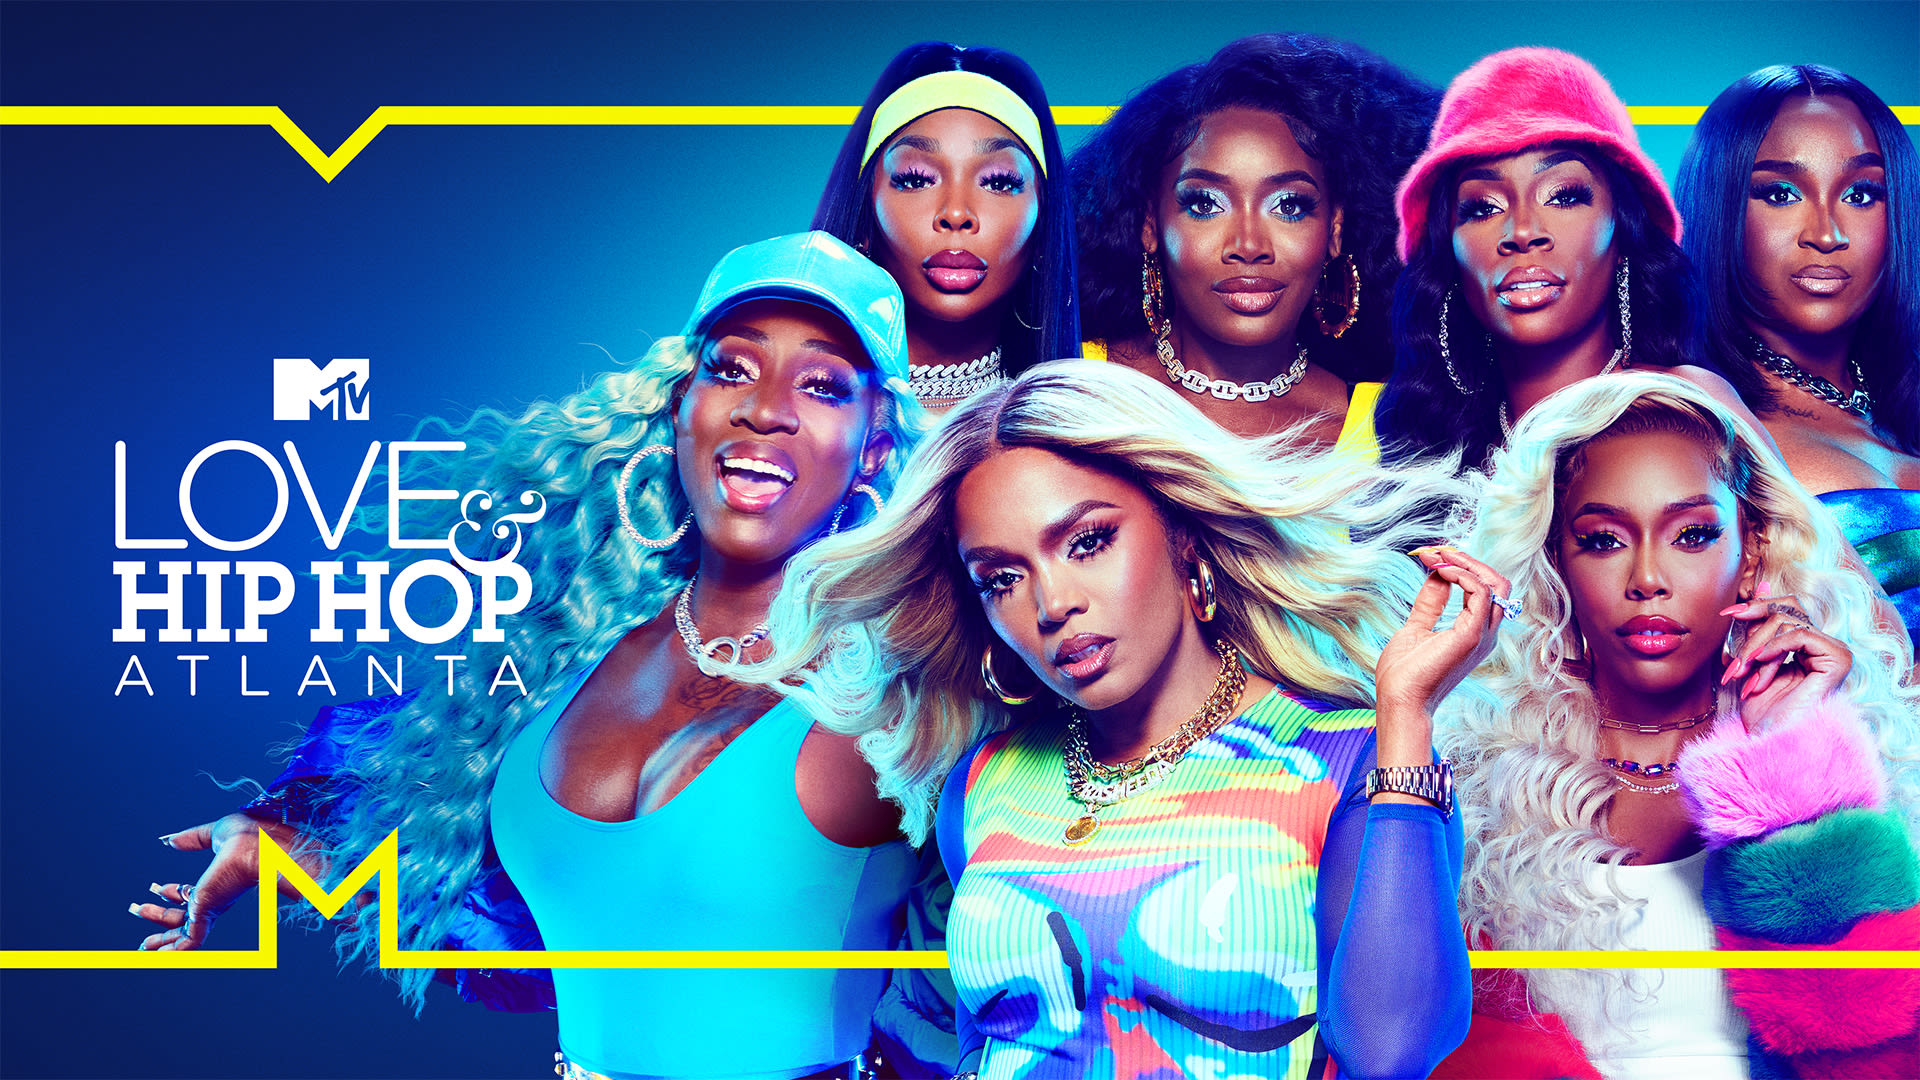 'Love & Hip Hop: Atlanta' Returns This July with New Season and First-Ever Collaborative Album